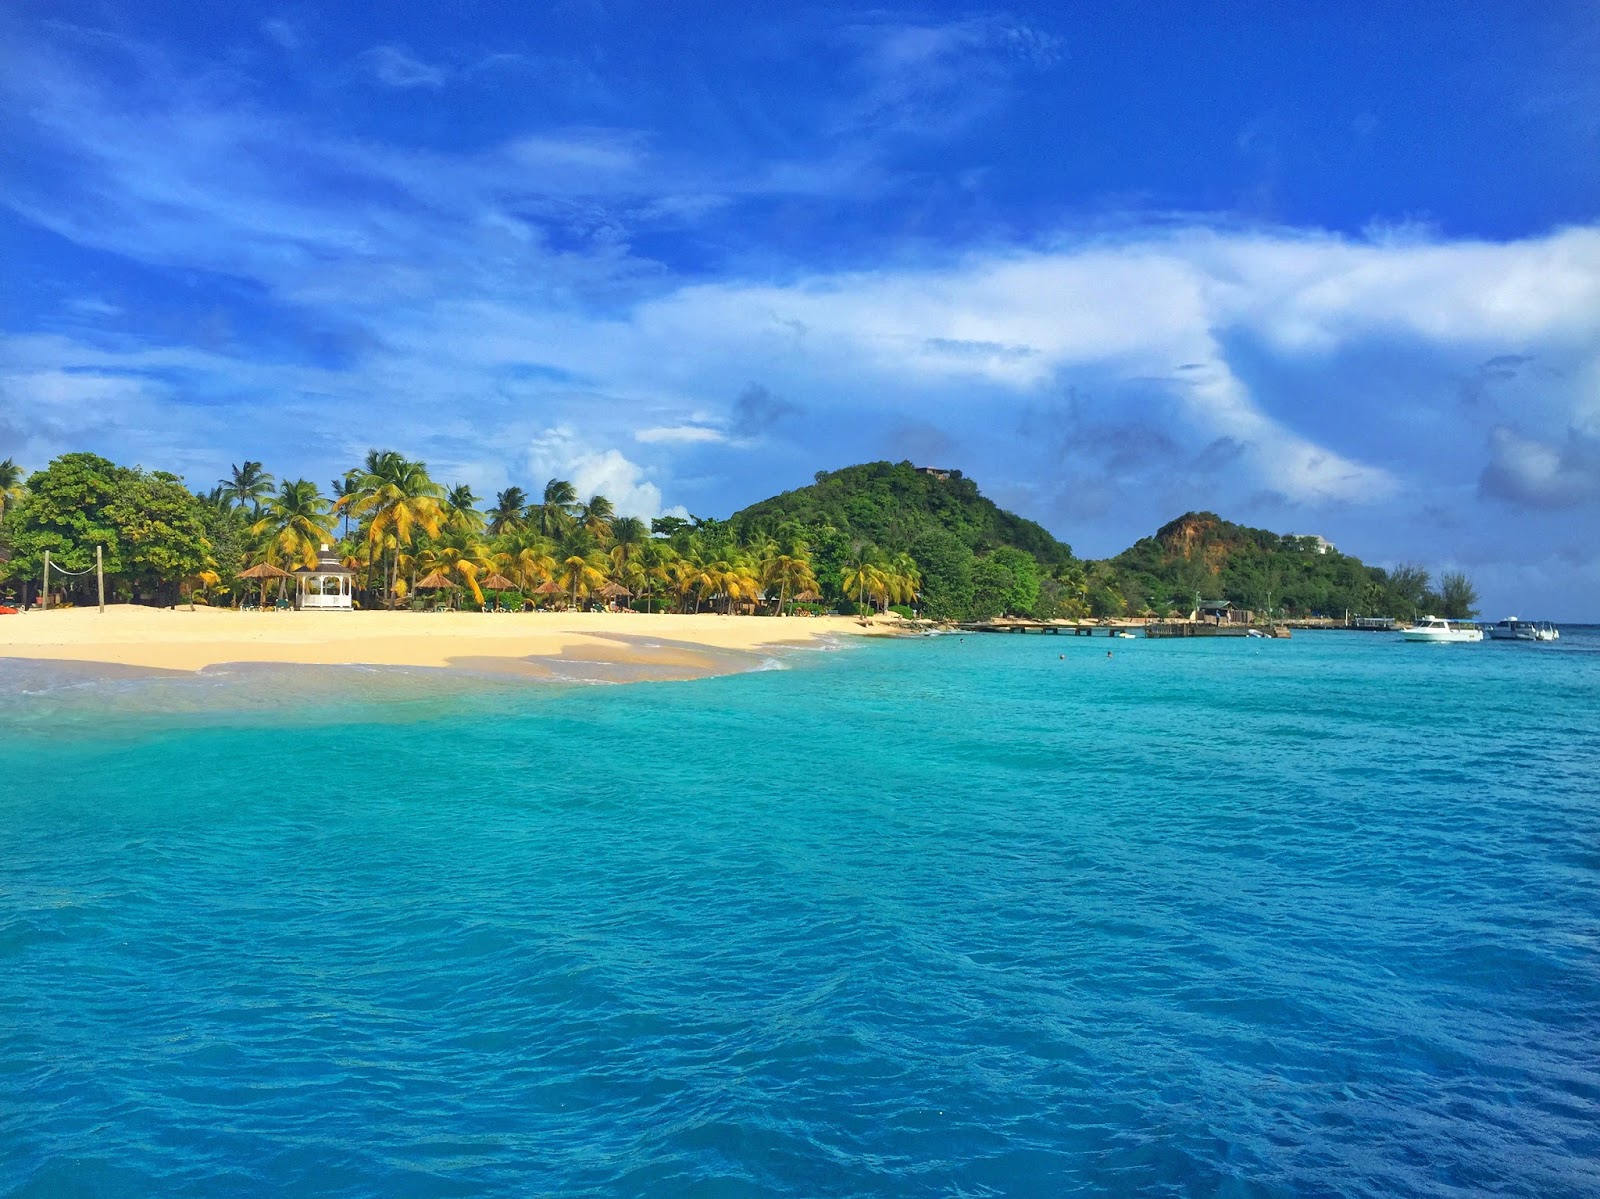 St. Vincent and the Grenadines - Paradise Found! - Travelista73